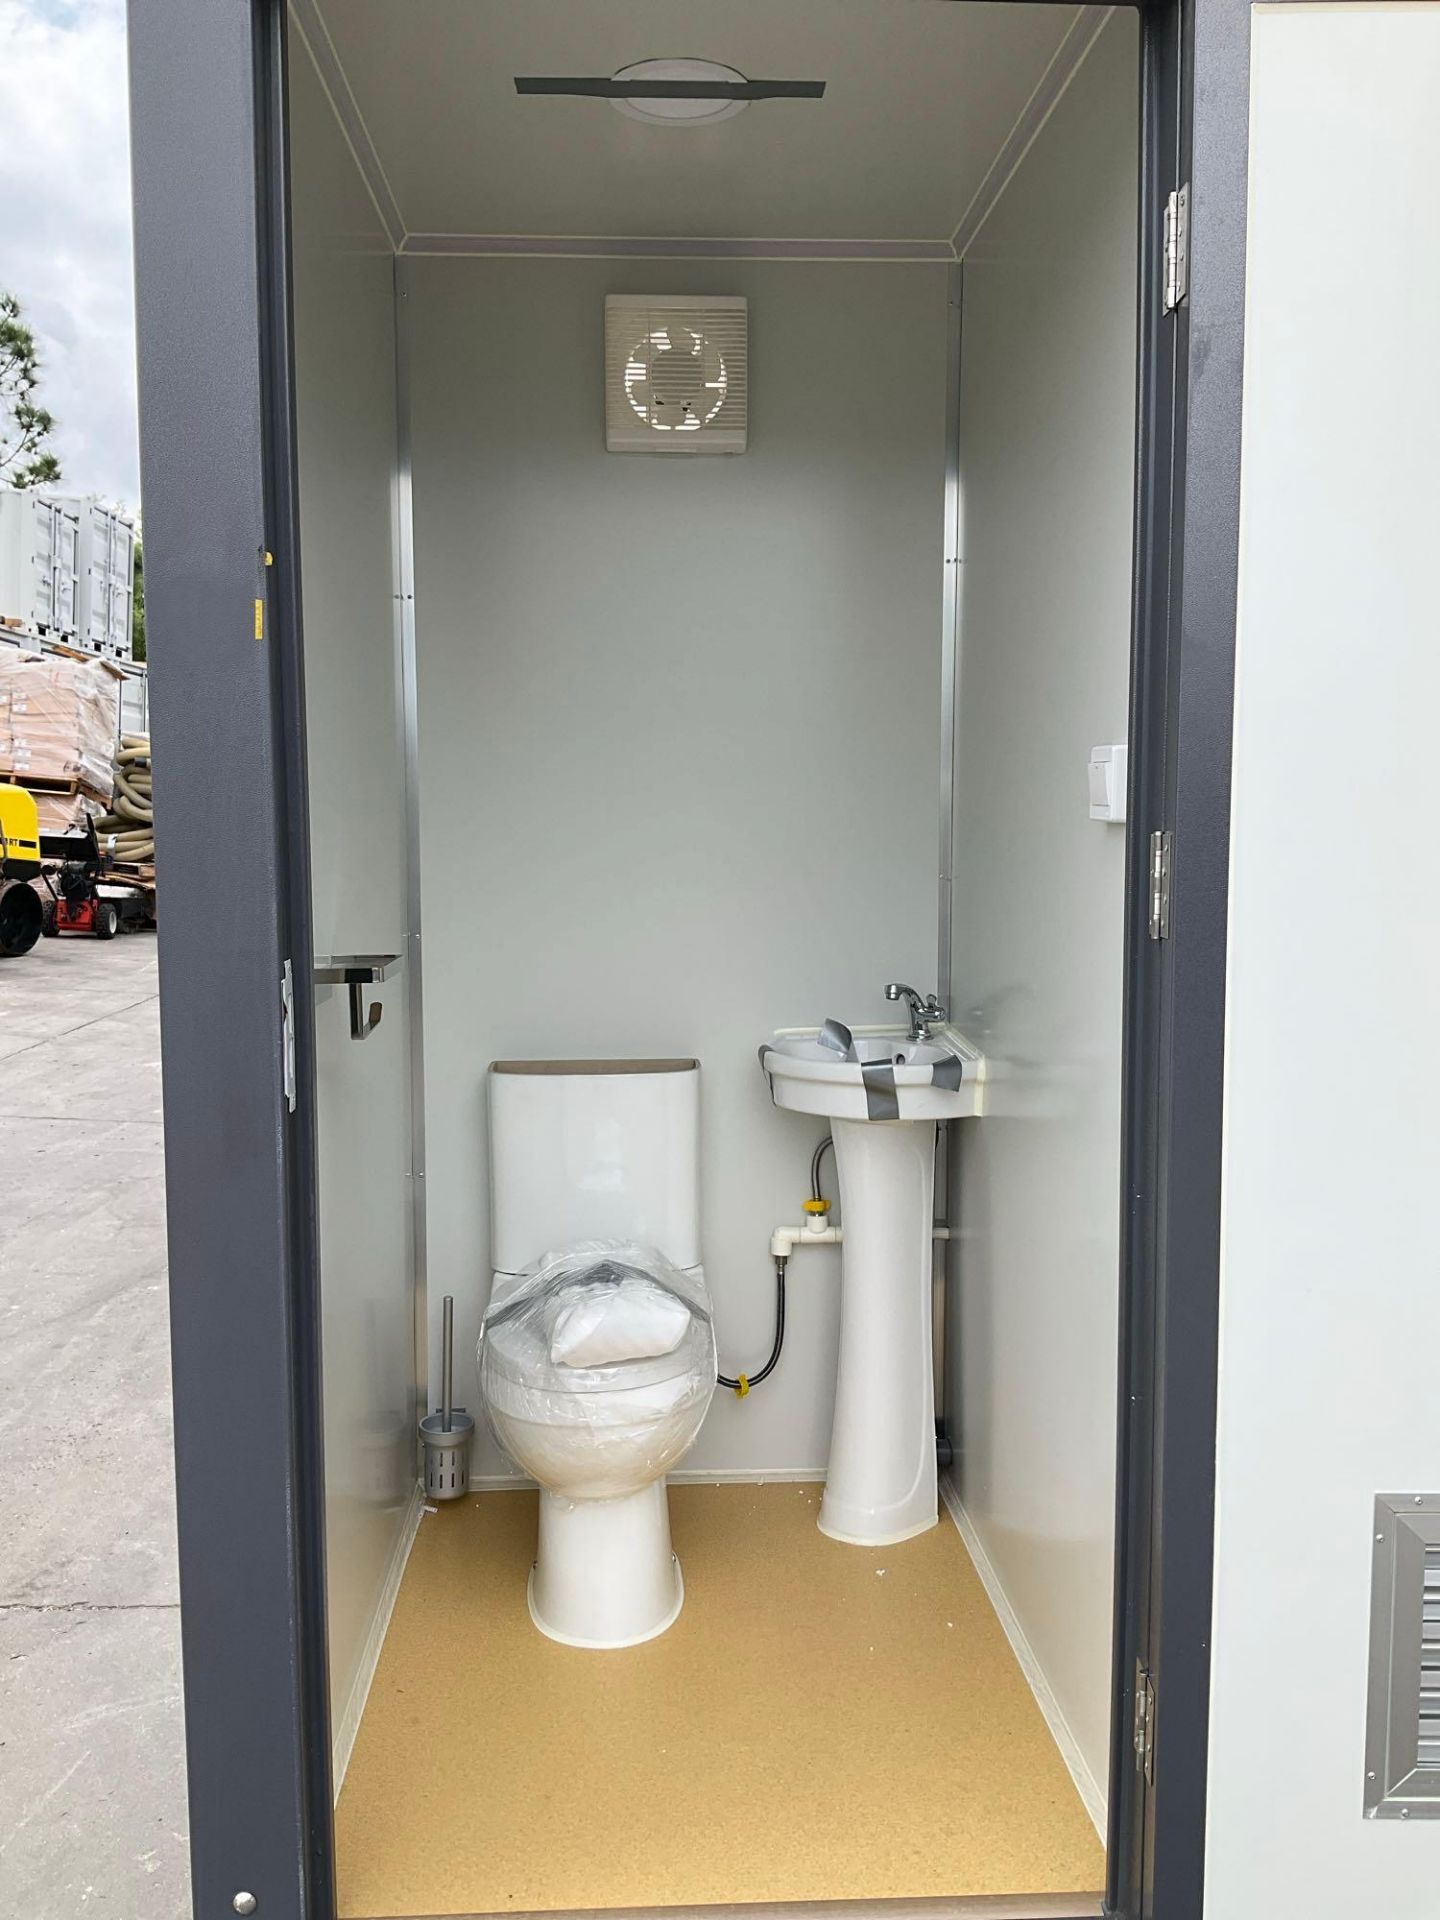 UNUSED PORTABLE DOUBLE BATHROOM UNIT, 2 STALLS, ELECTRIC & PLUMBING HOOK UP WITH EXTERIOR PLUMBIN... - Image 11 of 14